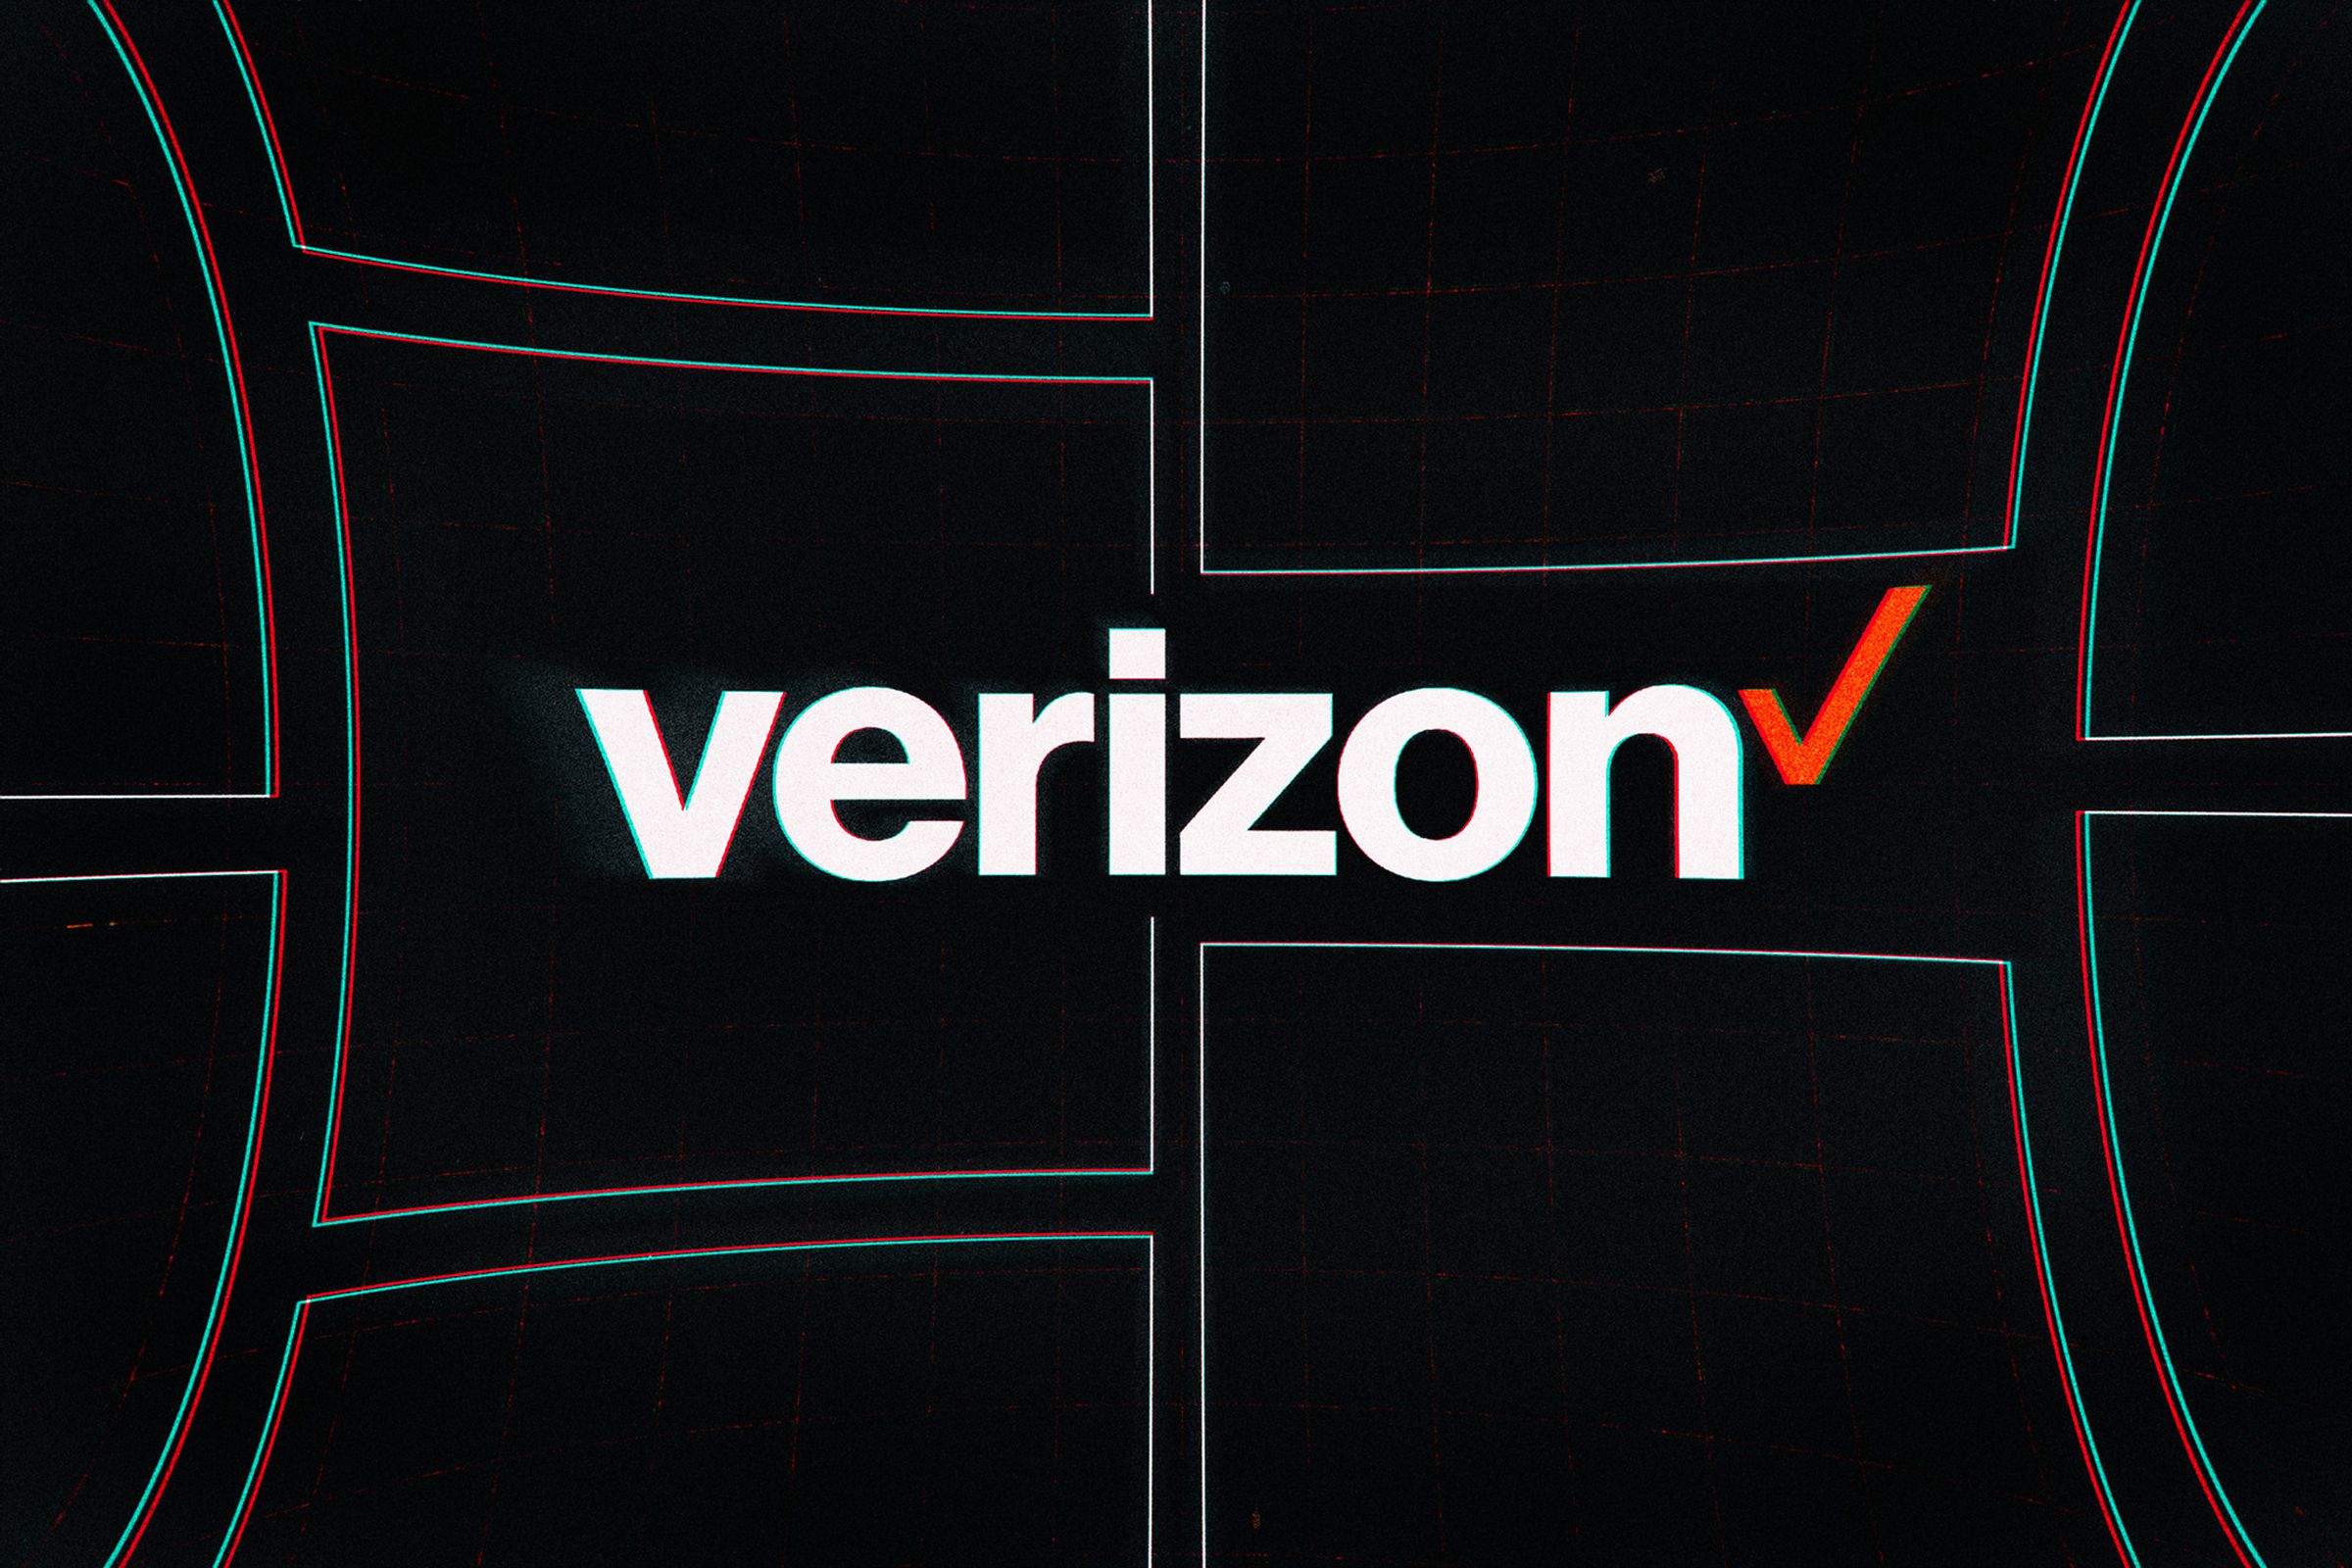 Verizon wants to funnel more customers into its more expensive unlimited plans.